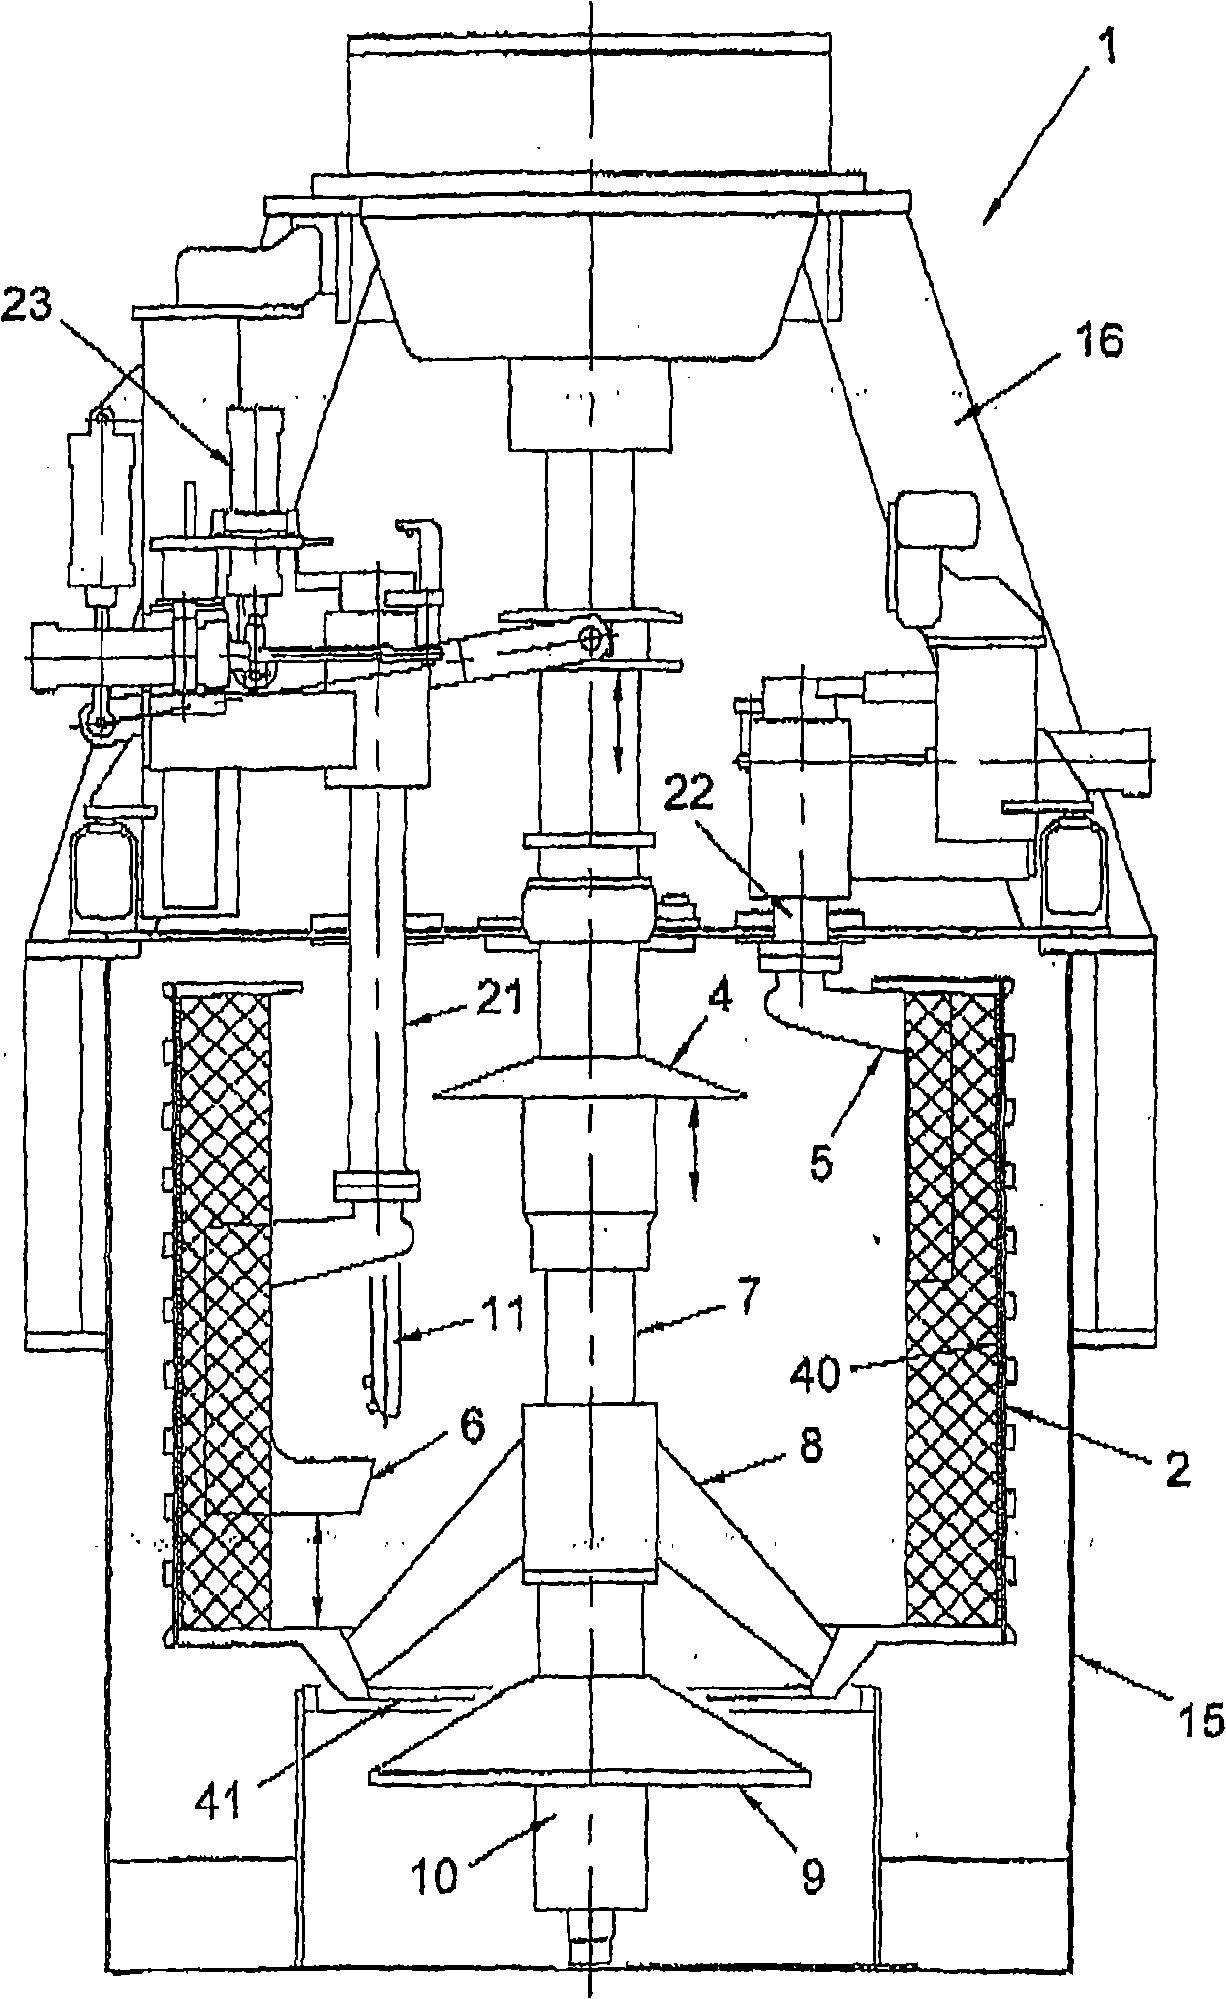 Discontinuous centrifugal machine which is intended, in particular, to separate molasses from sugar crystals in a masse-cuite